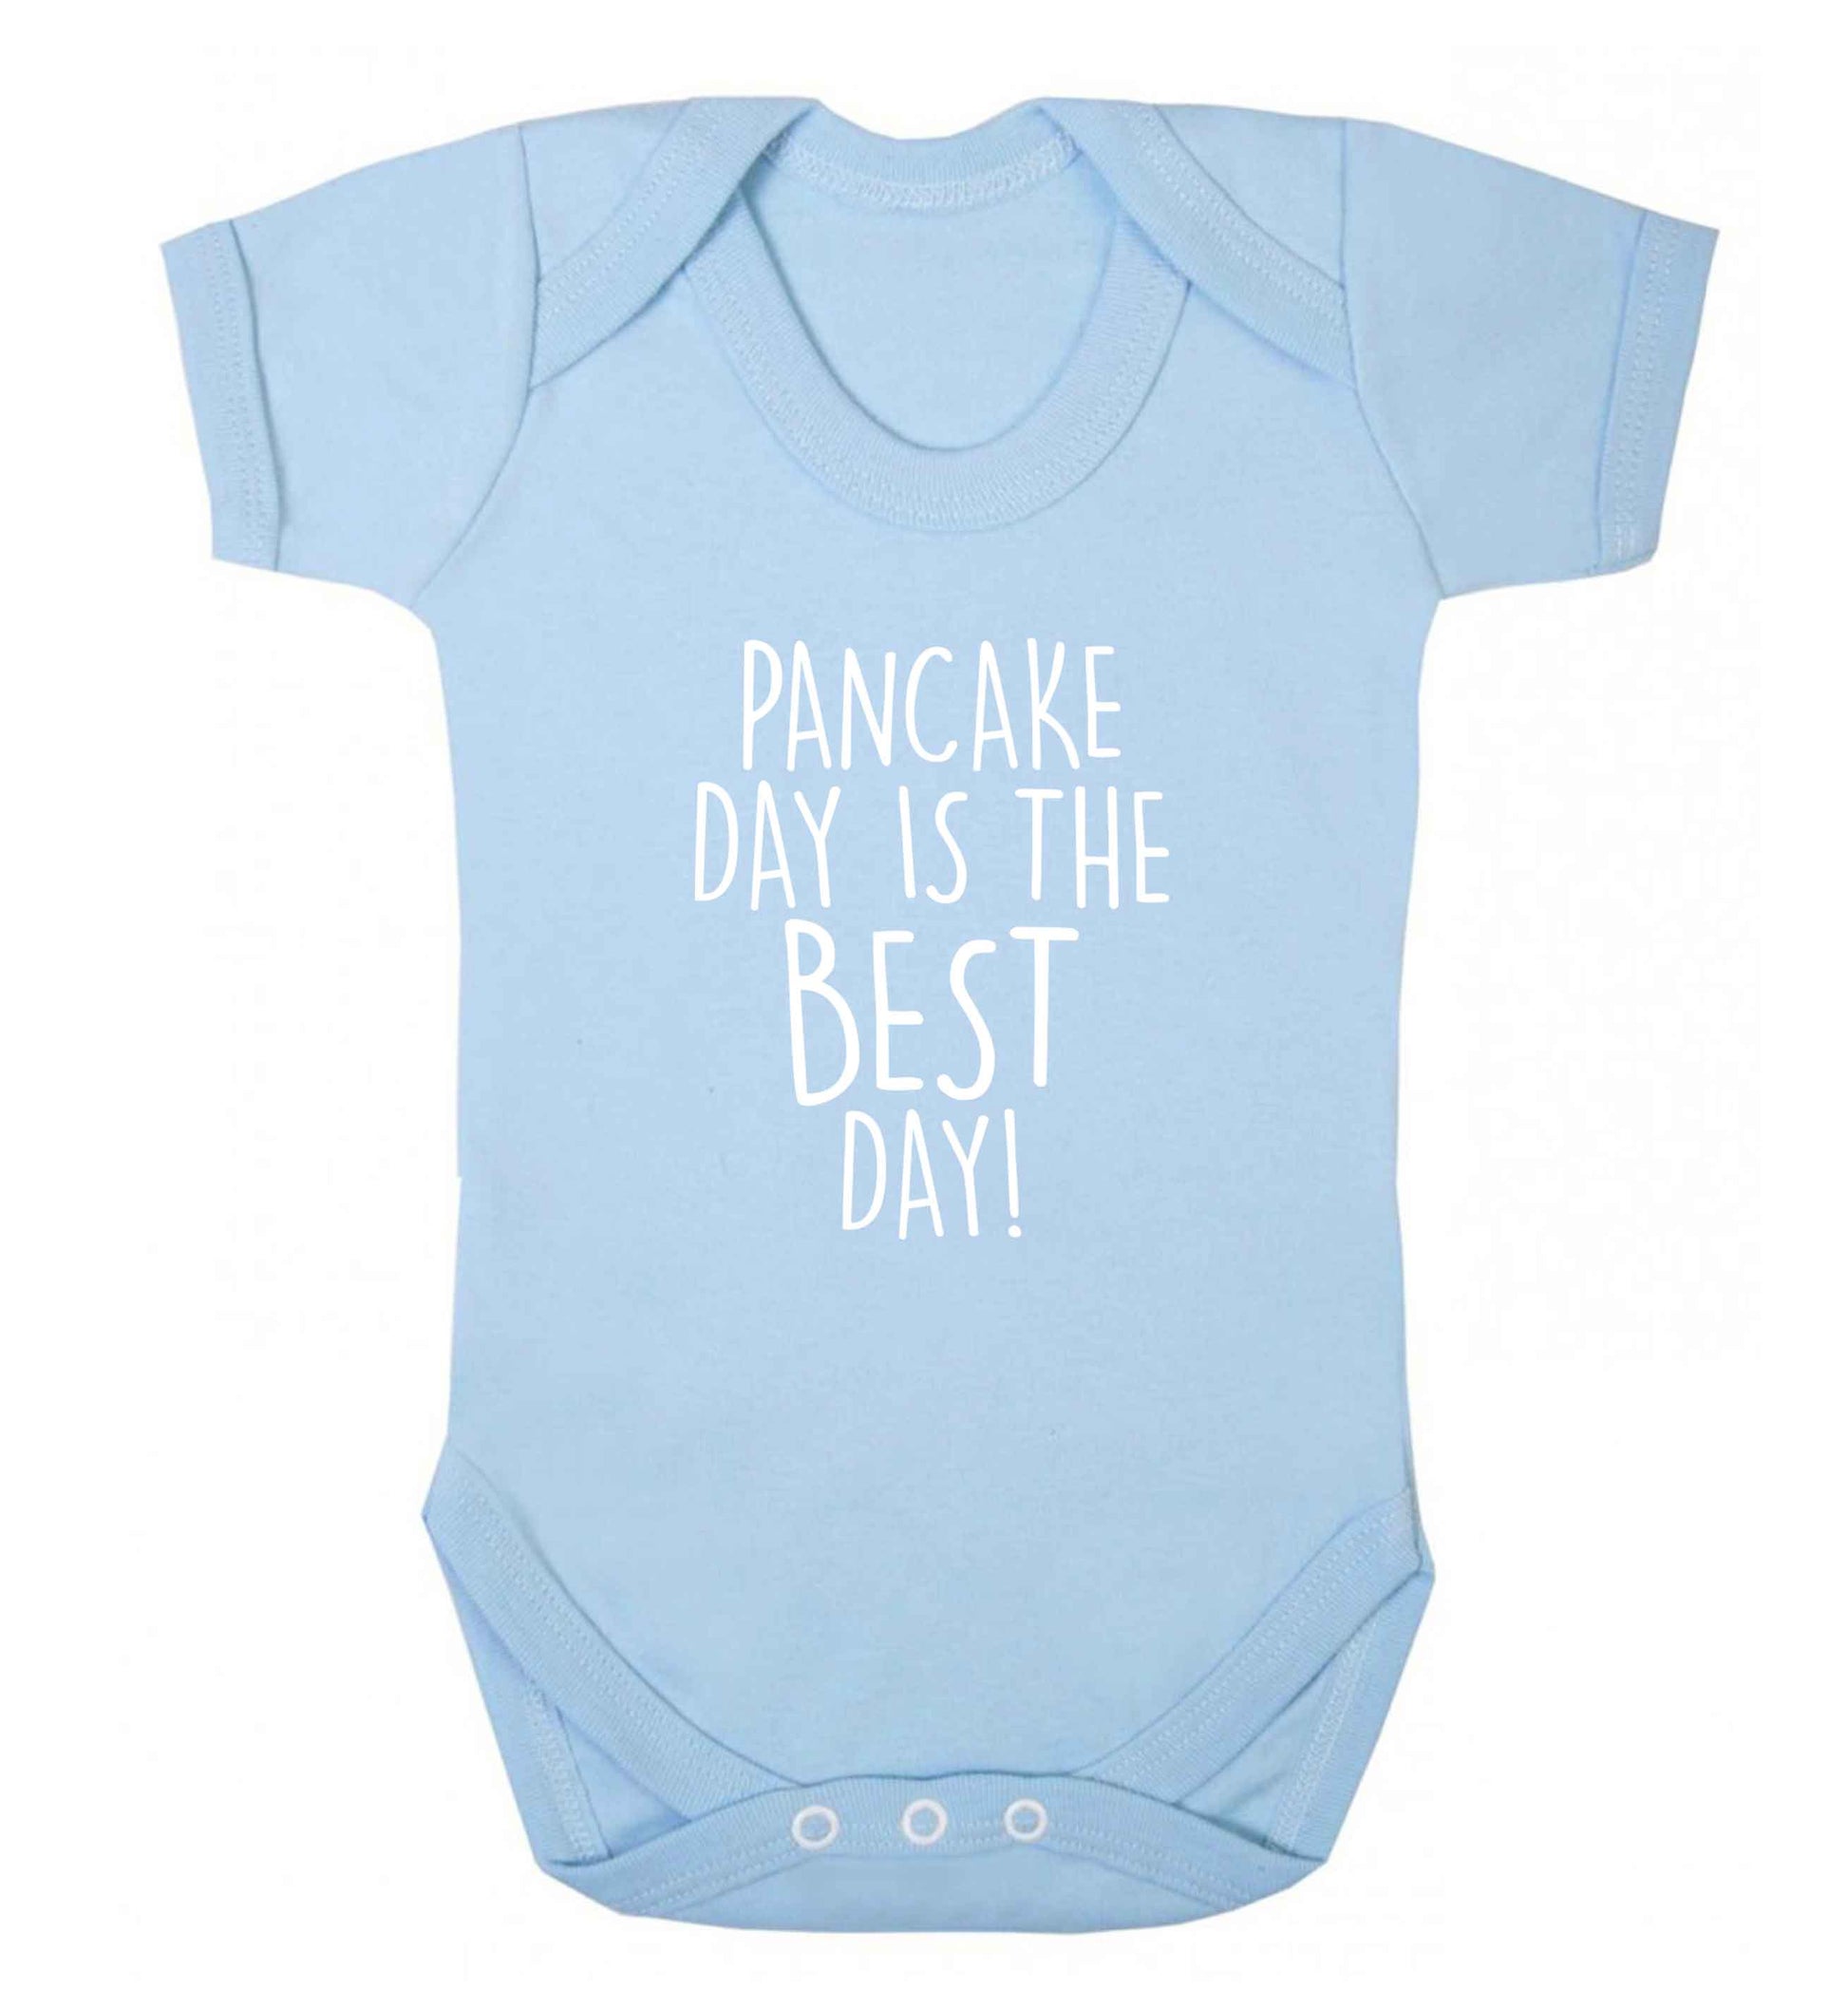 Pancake day is the best day baby vest pale blue 18-24 months